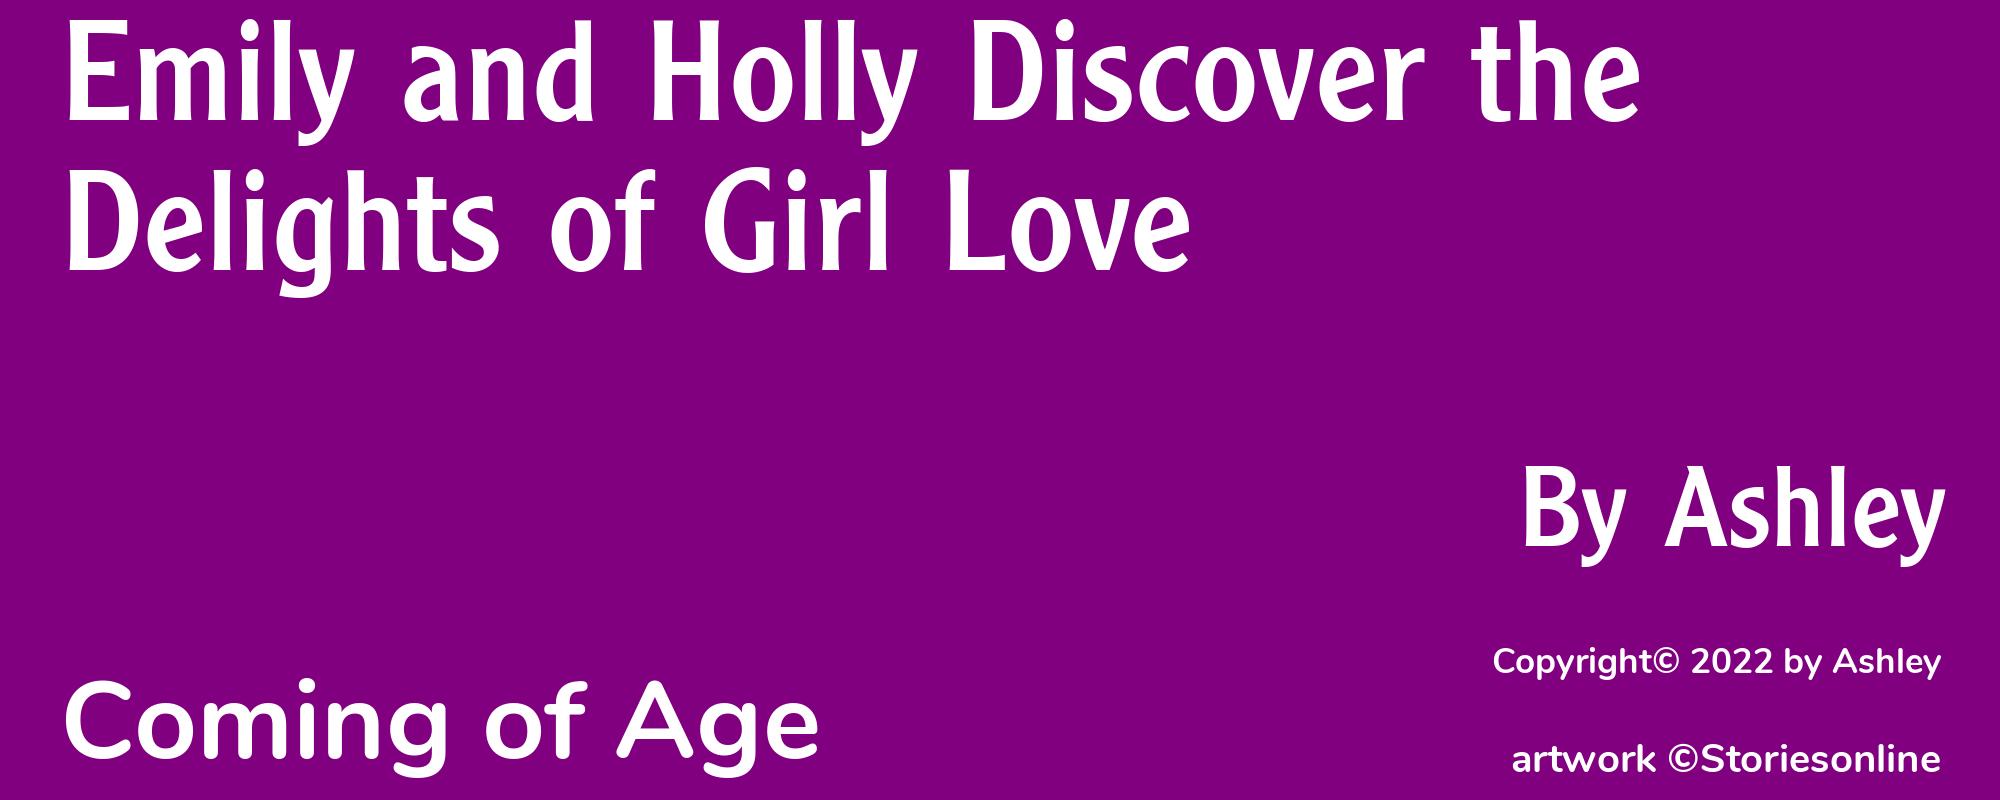 Emily and Holly Discover the Delights of Girl Love - Cover